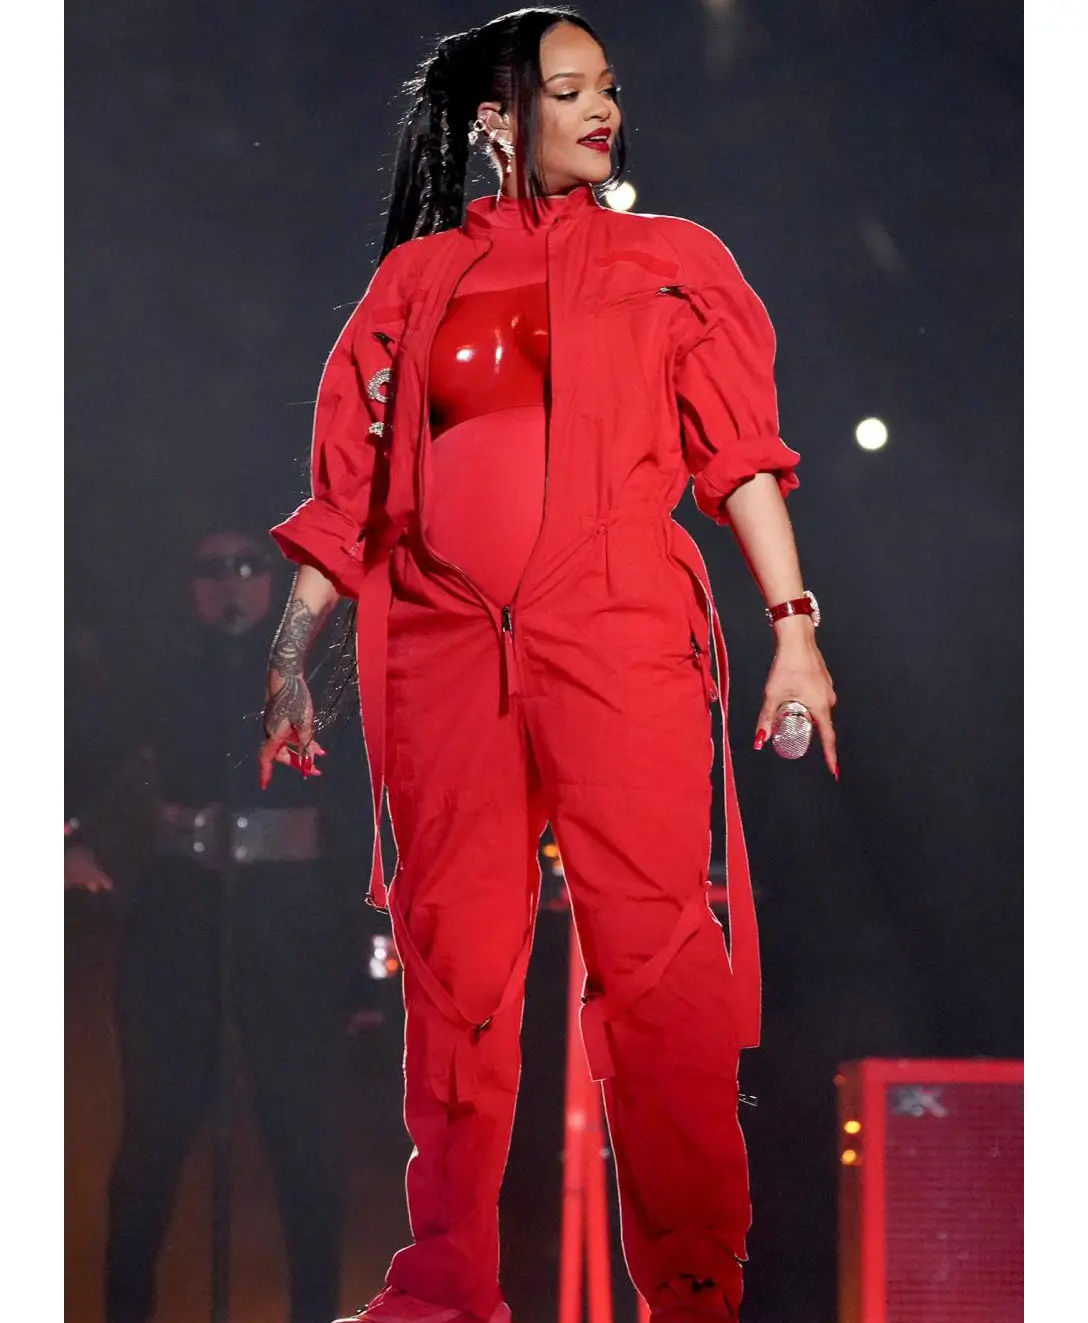 Rihanna Red Outfit For Sale - William Jacket